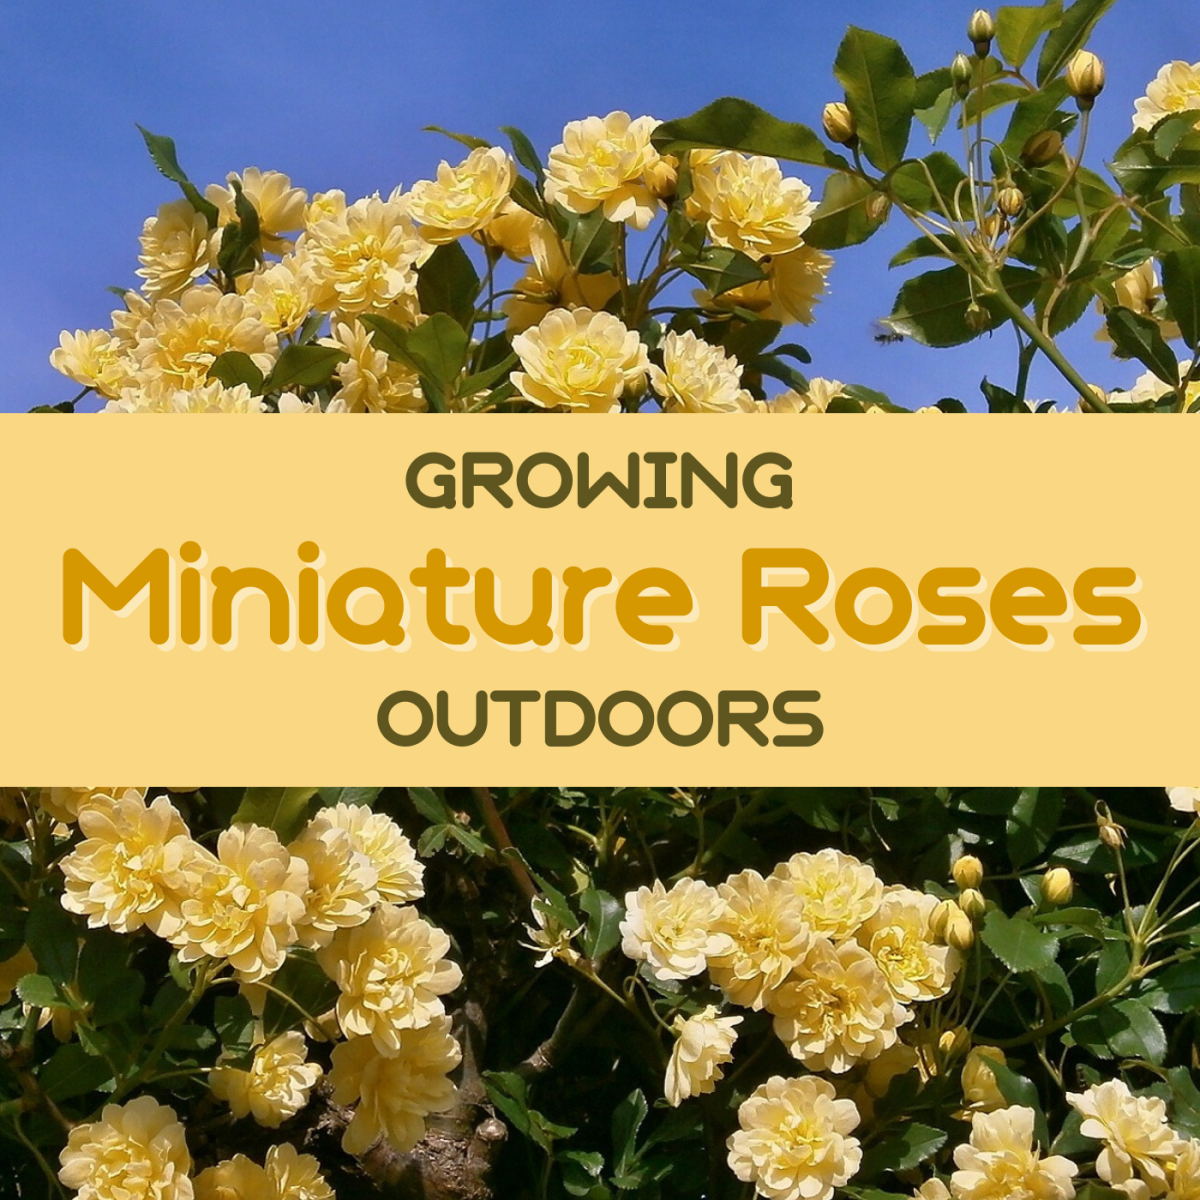 How to Plant a Miniature Rose Bush Outdoors